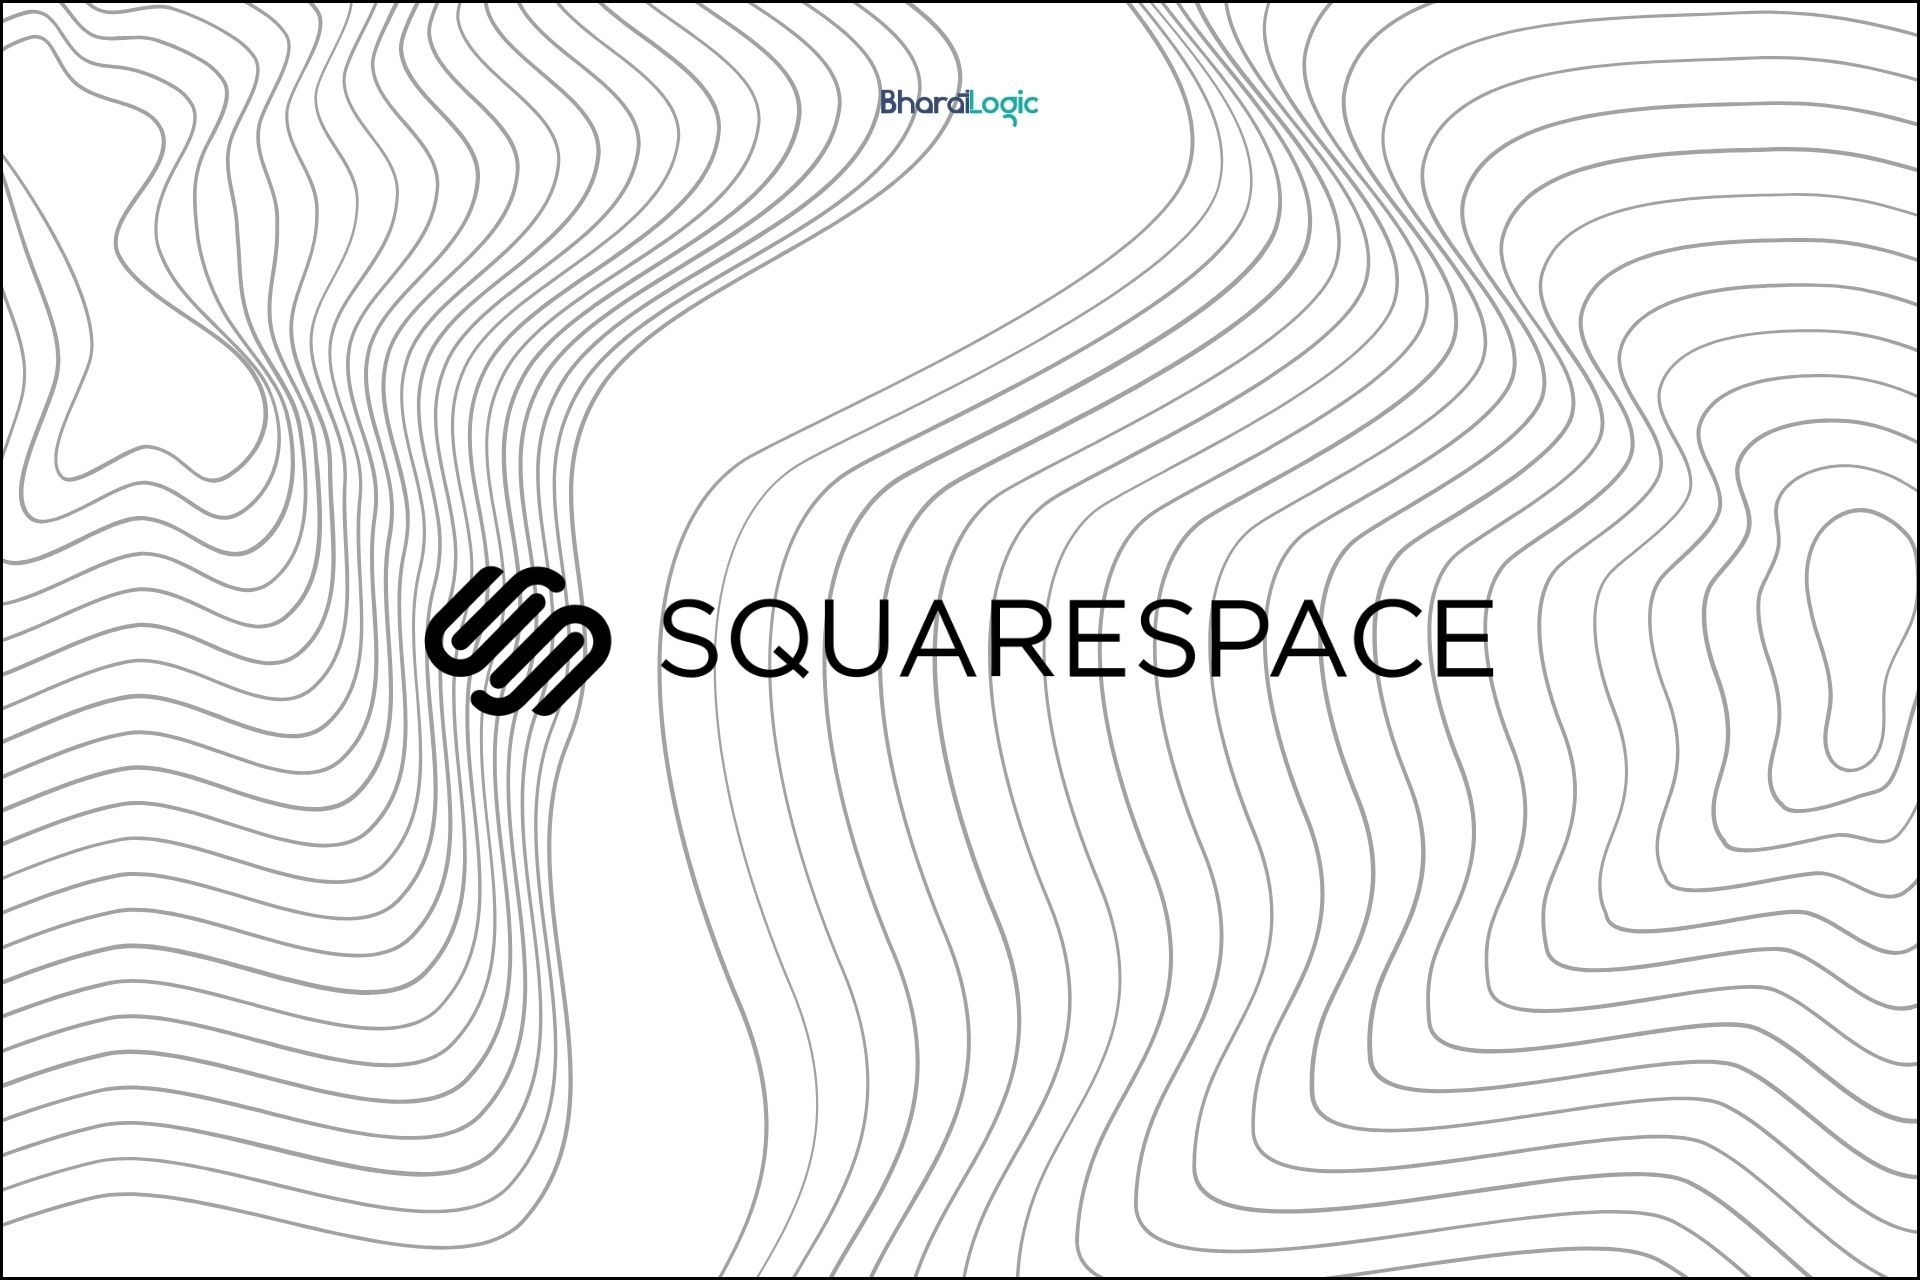 squarespace by bharatlogic